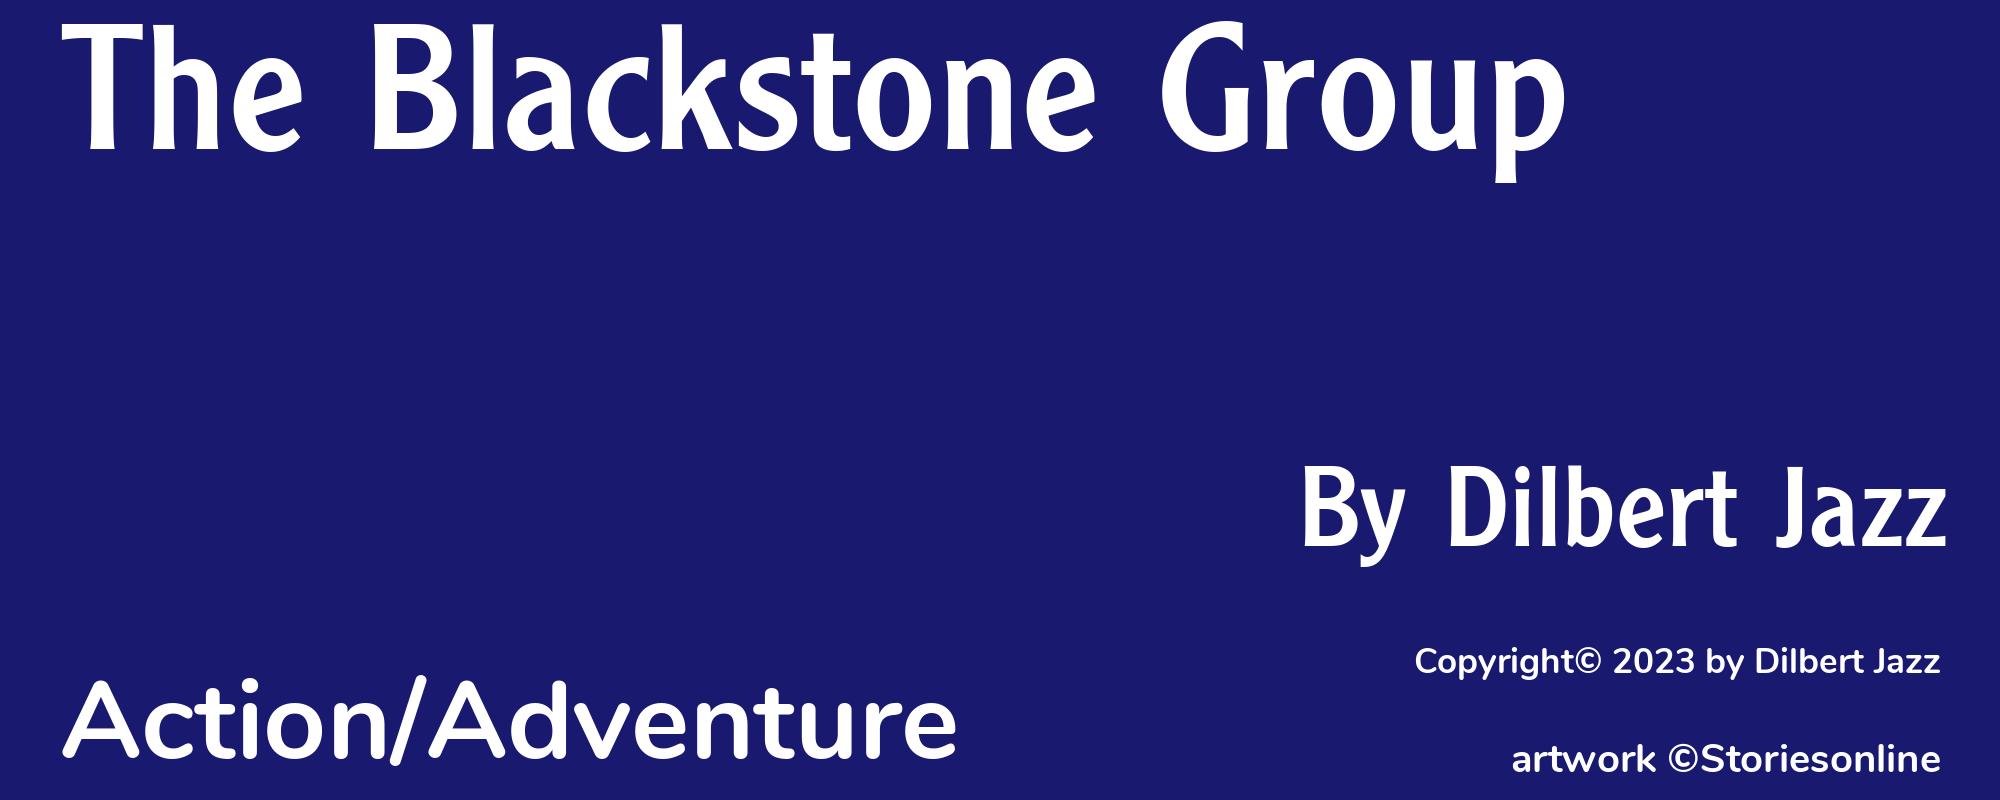 The Blackstone Group - Cover